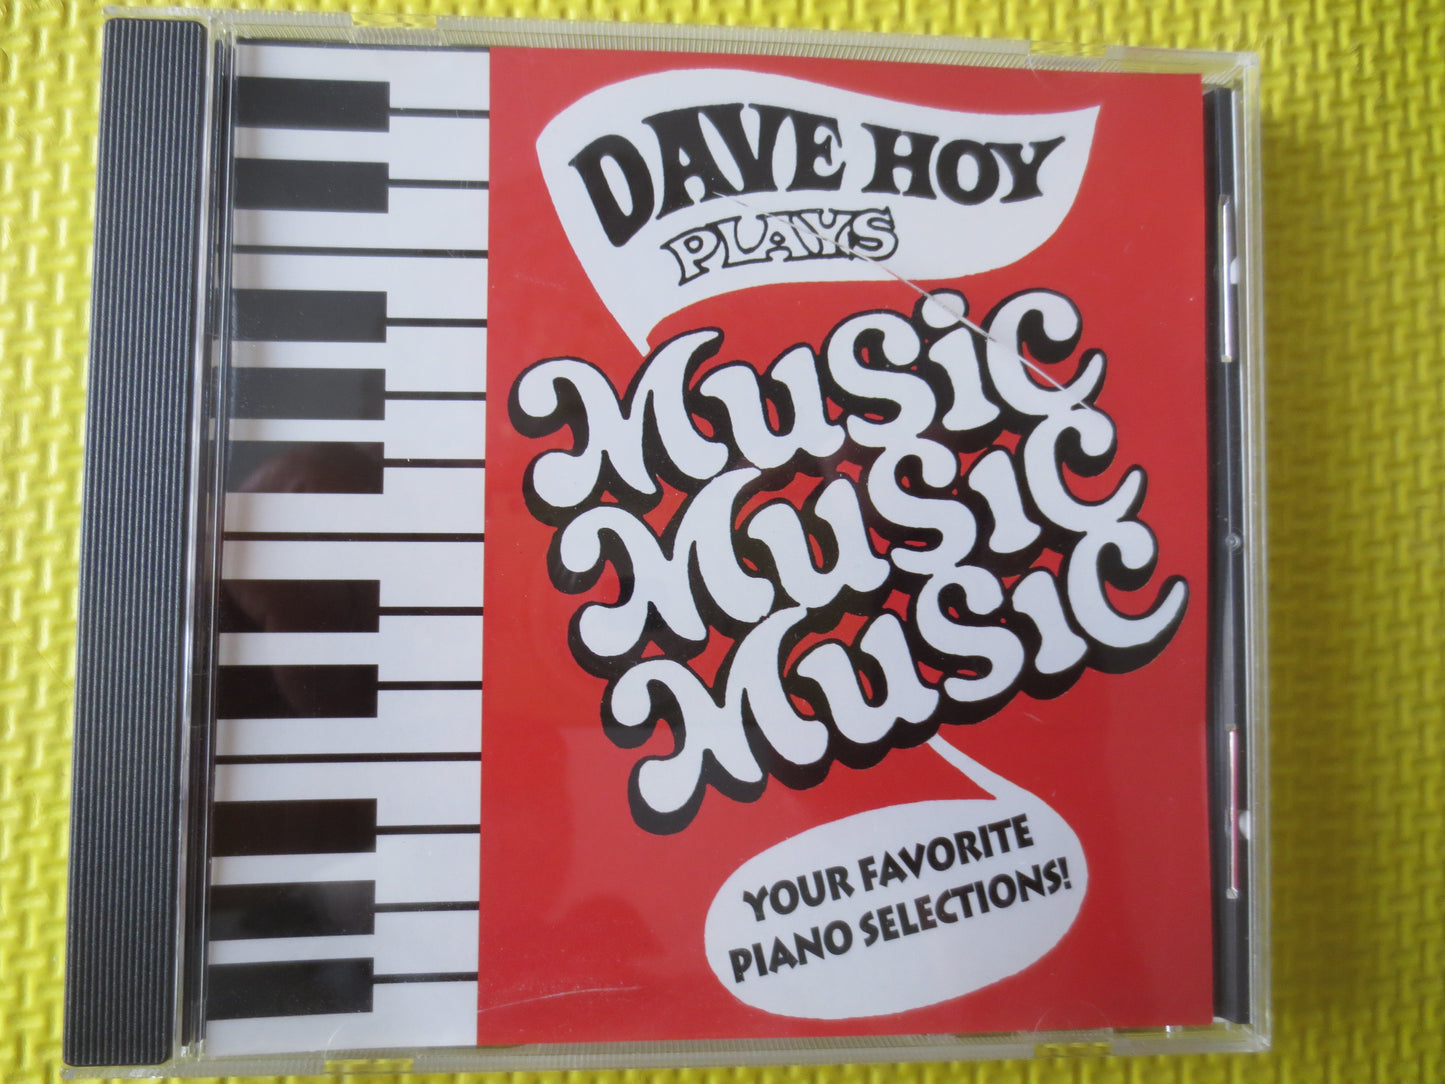 DAVE HOY, MUSIC, Music Music, Dave Hoy Cd, Ragtime cd, Ragtime Music Cd, Dave Hoy Albums, Jazz Cd, Cds, Piano Compact Discs